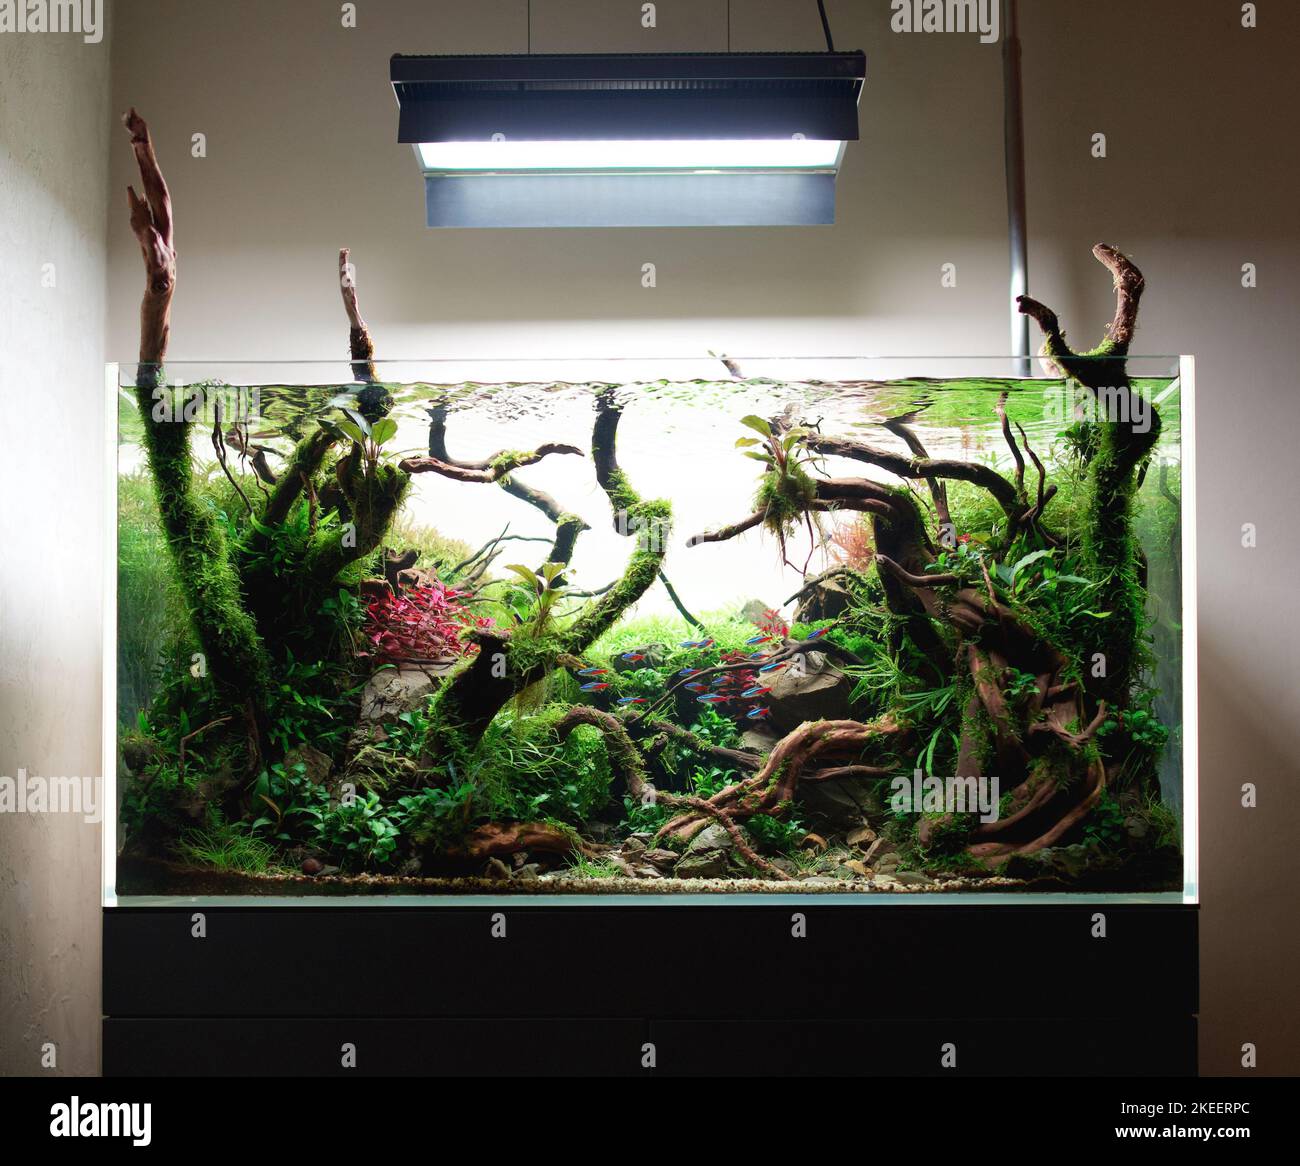 Beautiful freshwater aquascape with live aquarium plants, Frodo stones, redmoor roots covered by java moss and a school of blue neon tetra fish. Stock Photo